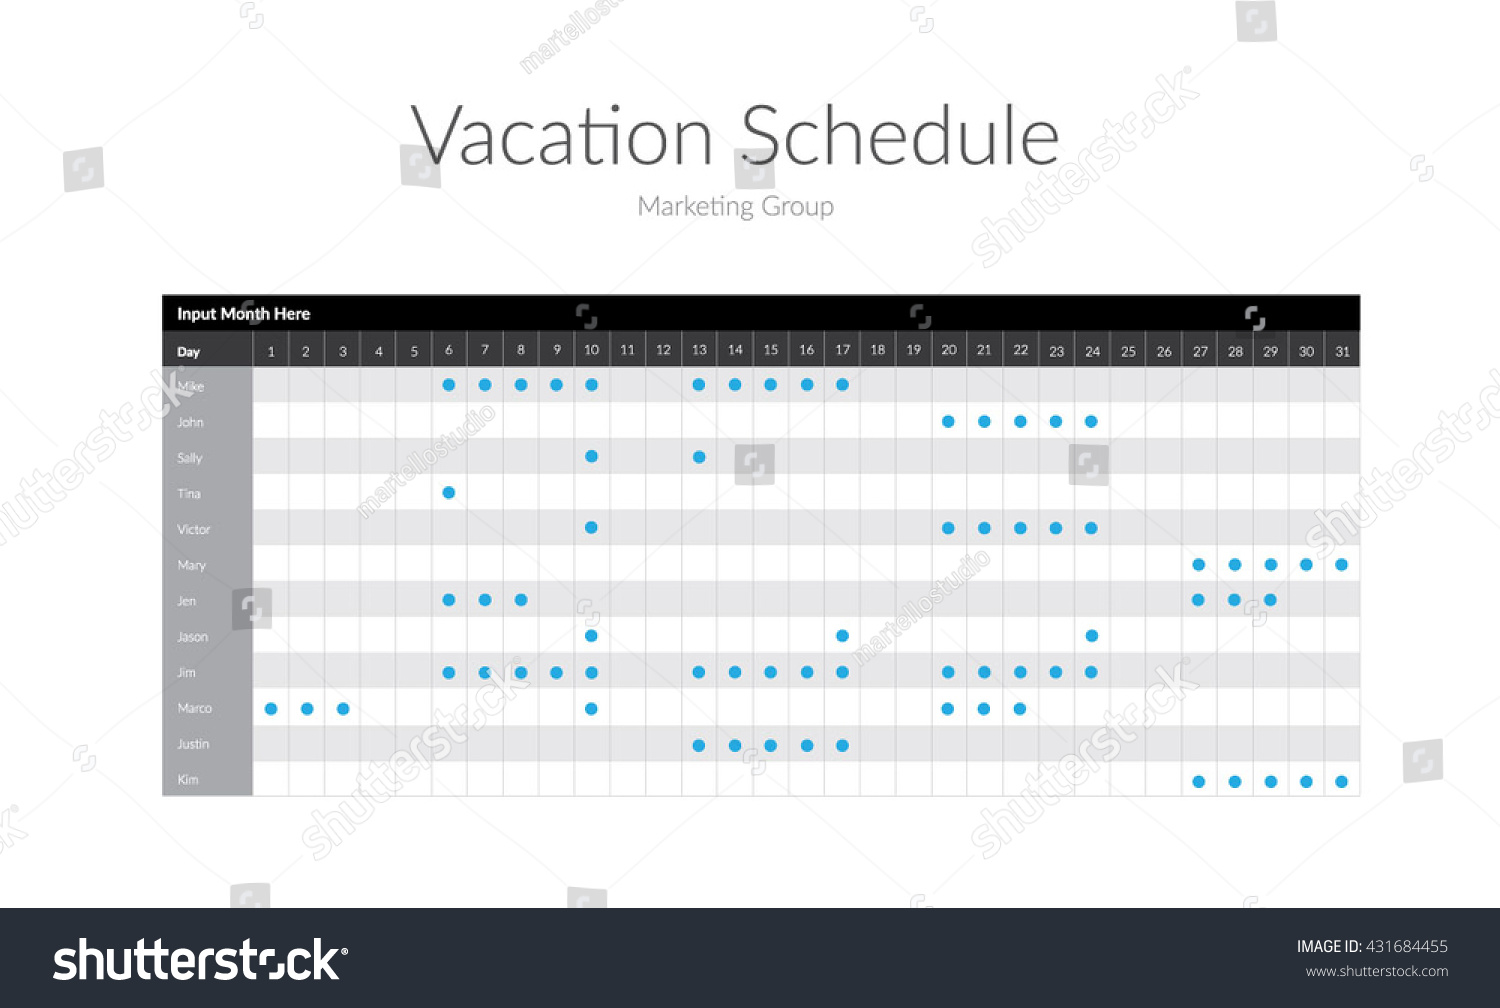 Vacation Schedule Template from image.shutterstock.com